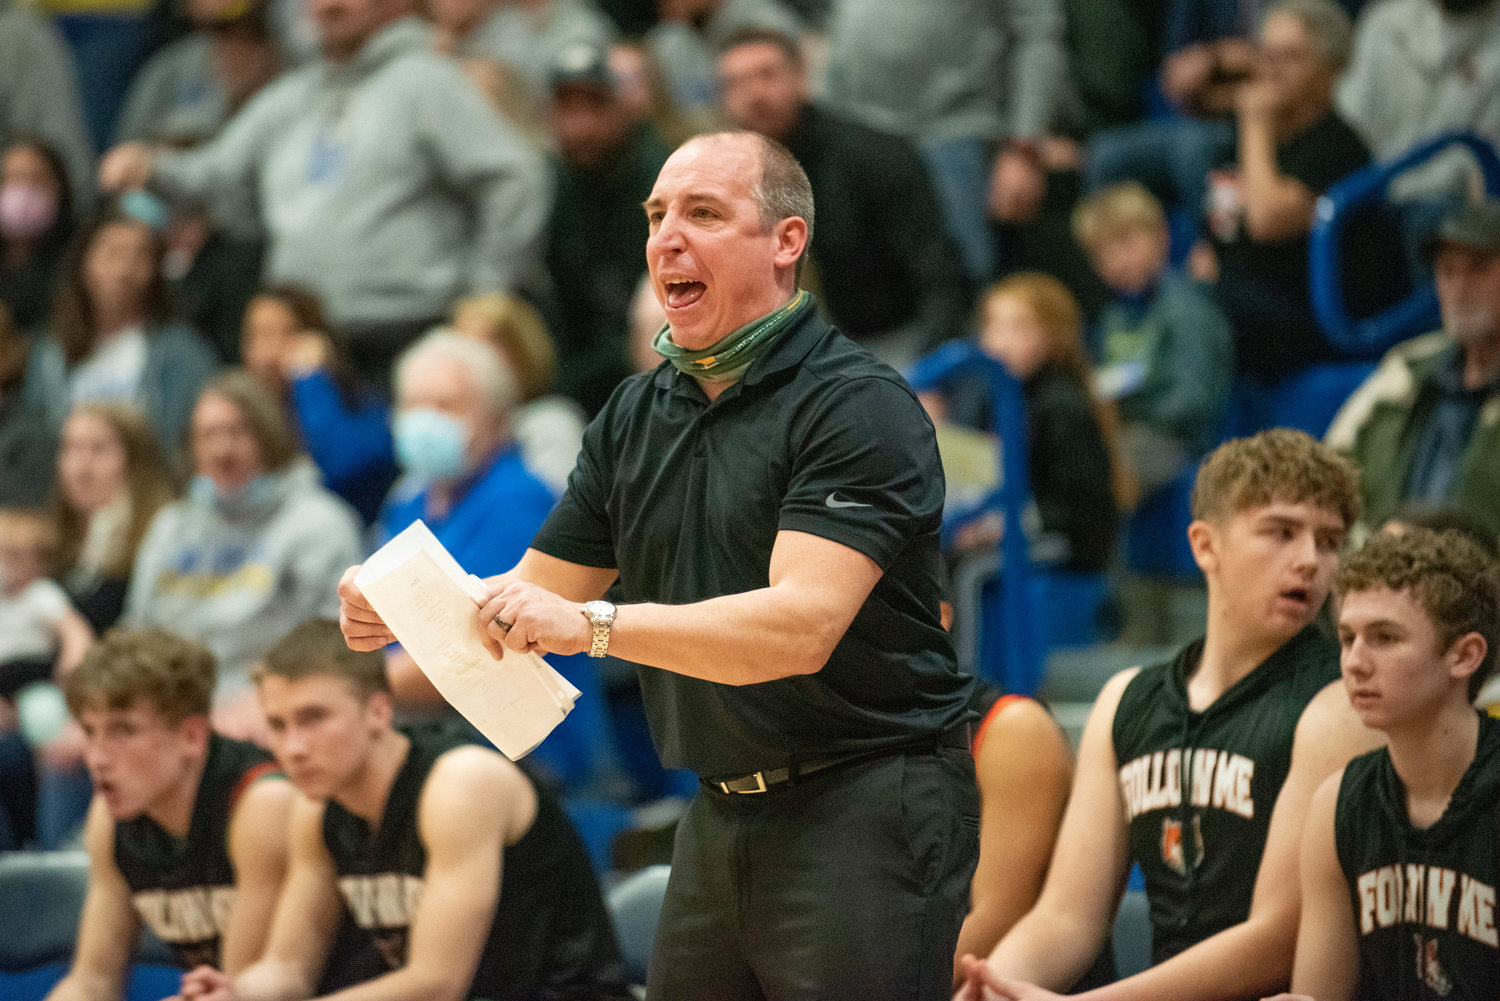 Morton-White Pass coach Chad Cramer calls out to his team during the district semifinals against Adna on Feb. 15.